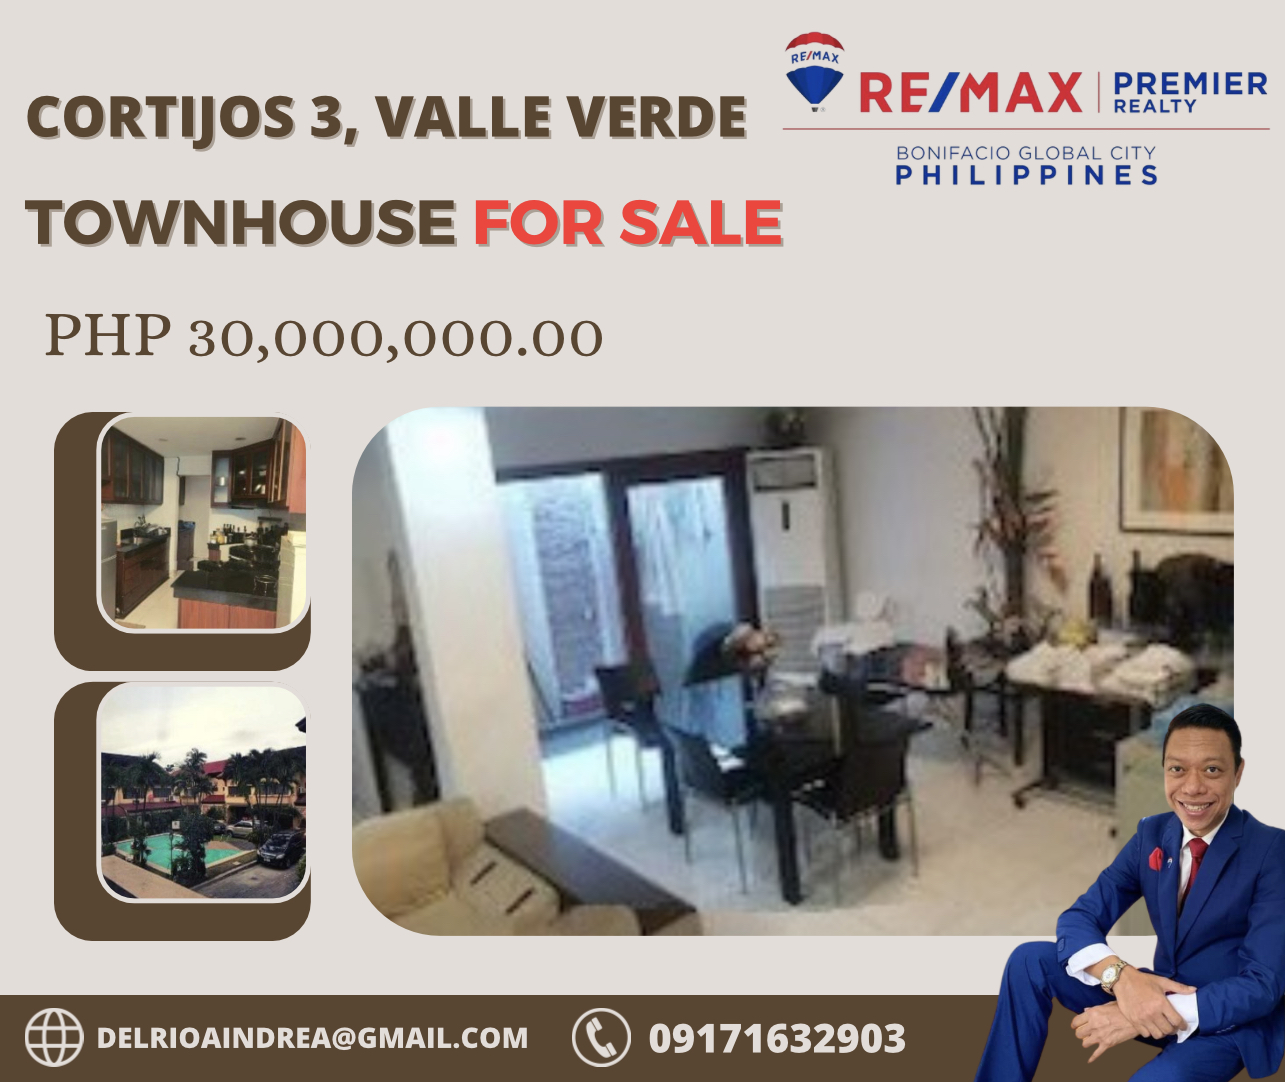 Townhouse for Sale in Cortijos 3, Valle Verde‼️ New in the Market!!